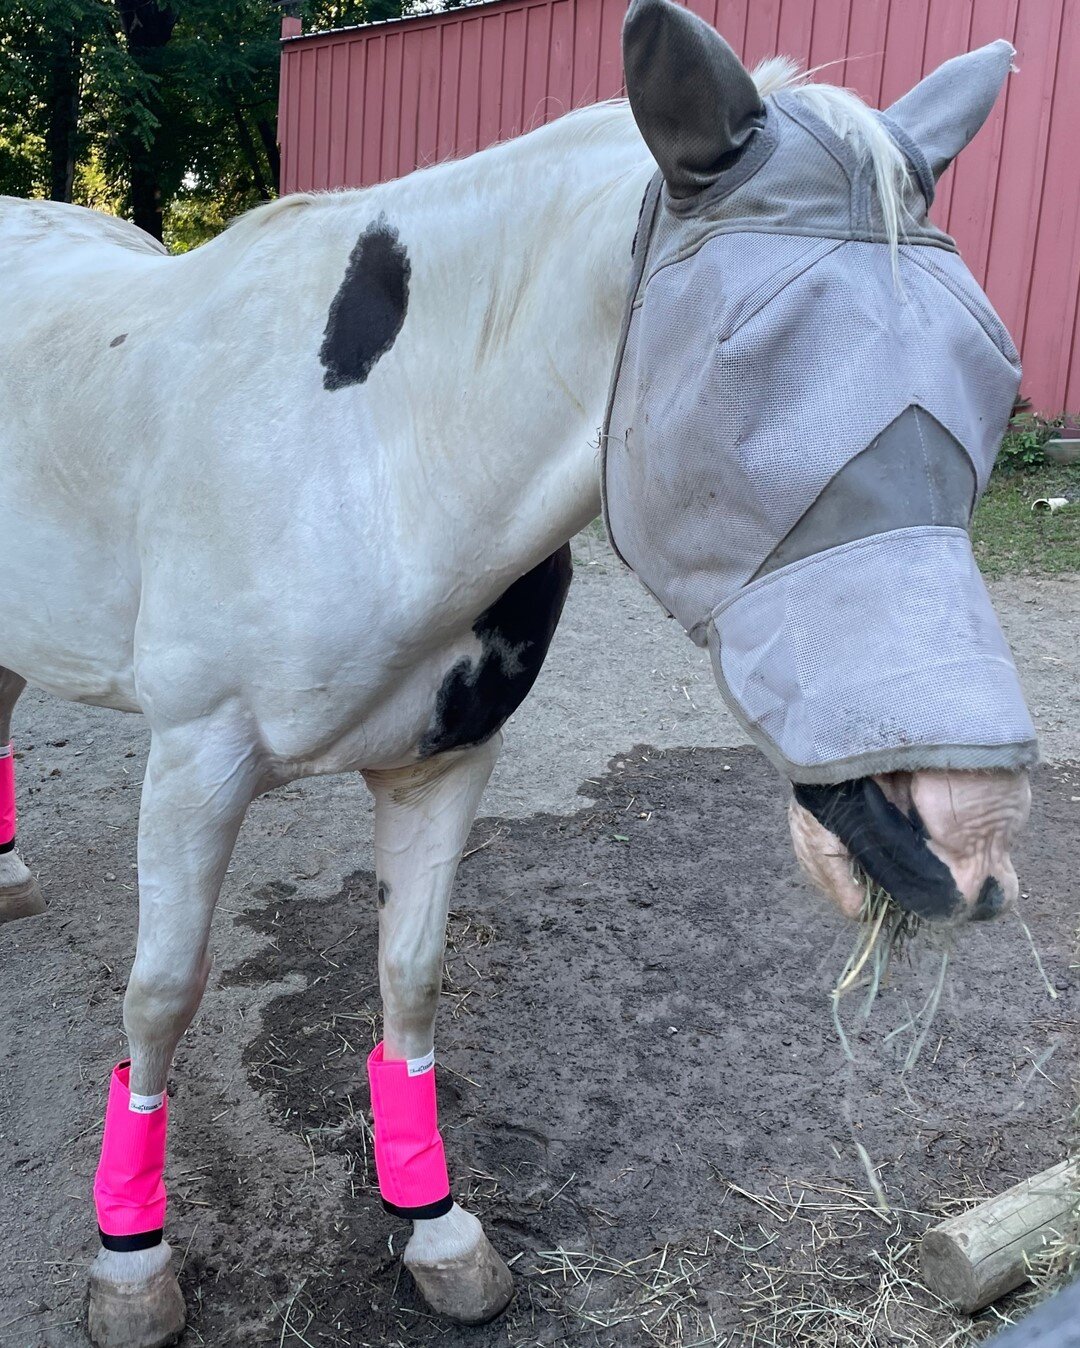 Willow defeating the bugs in her pink fly mask and pink fly boots 💗 ⠀⠀⠀⠀⠀⠀⠀⠀⠀
⠀⠀⠀⠀⠀⠀⠀⠀⠀
#strongwomen #femininepower #mompreneurlife #wellness #photography #photooftheday #findjoyintheordinary  #truehappiness #choosehappiness #dmvevents #exploredmv #